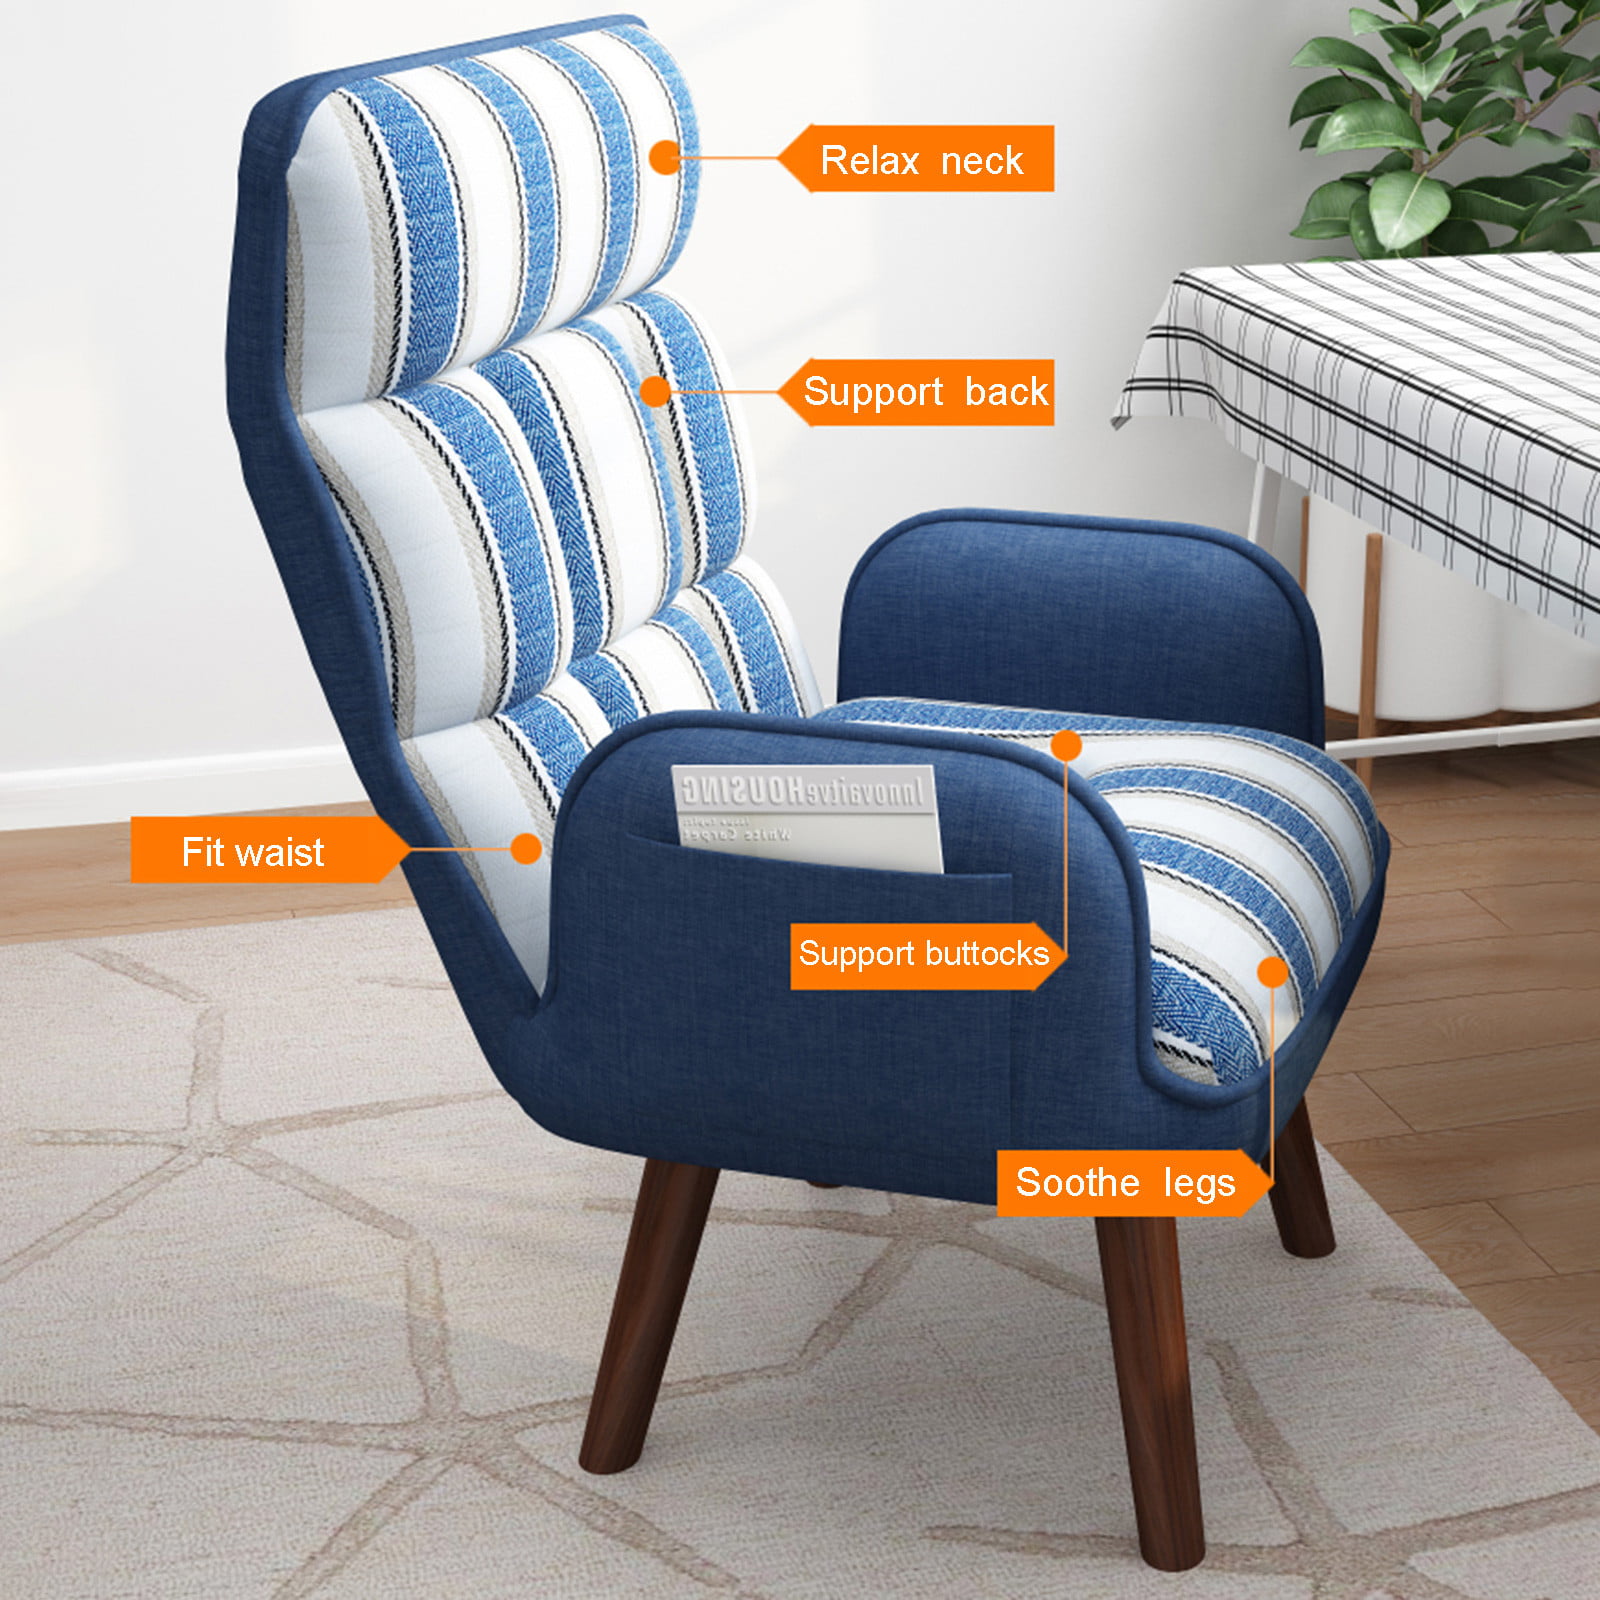 Details about   ❤Single Sofa Chair Reclining Backrest Headrest Adjustable Angle Can Be Rotated 